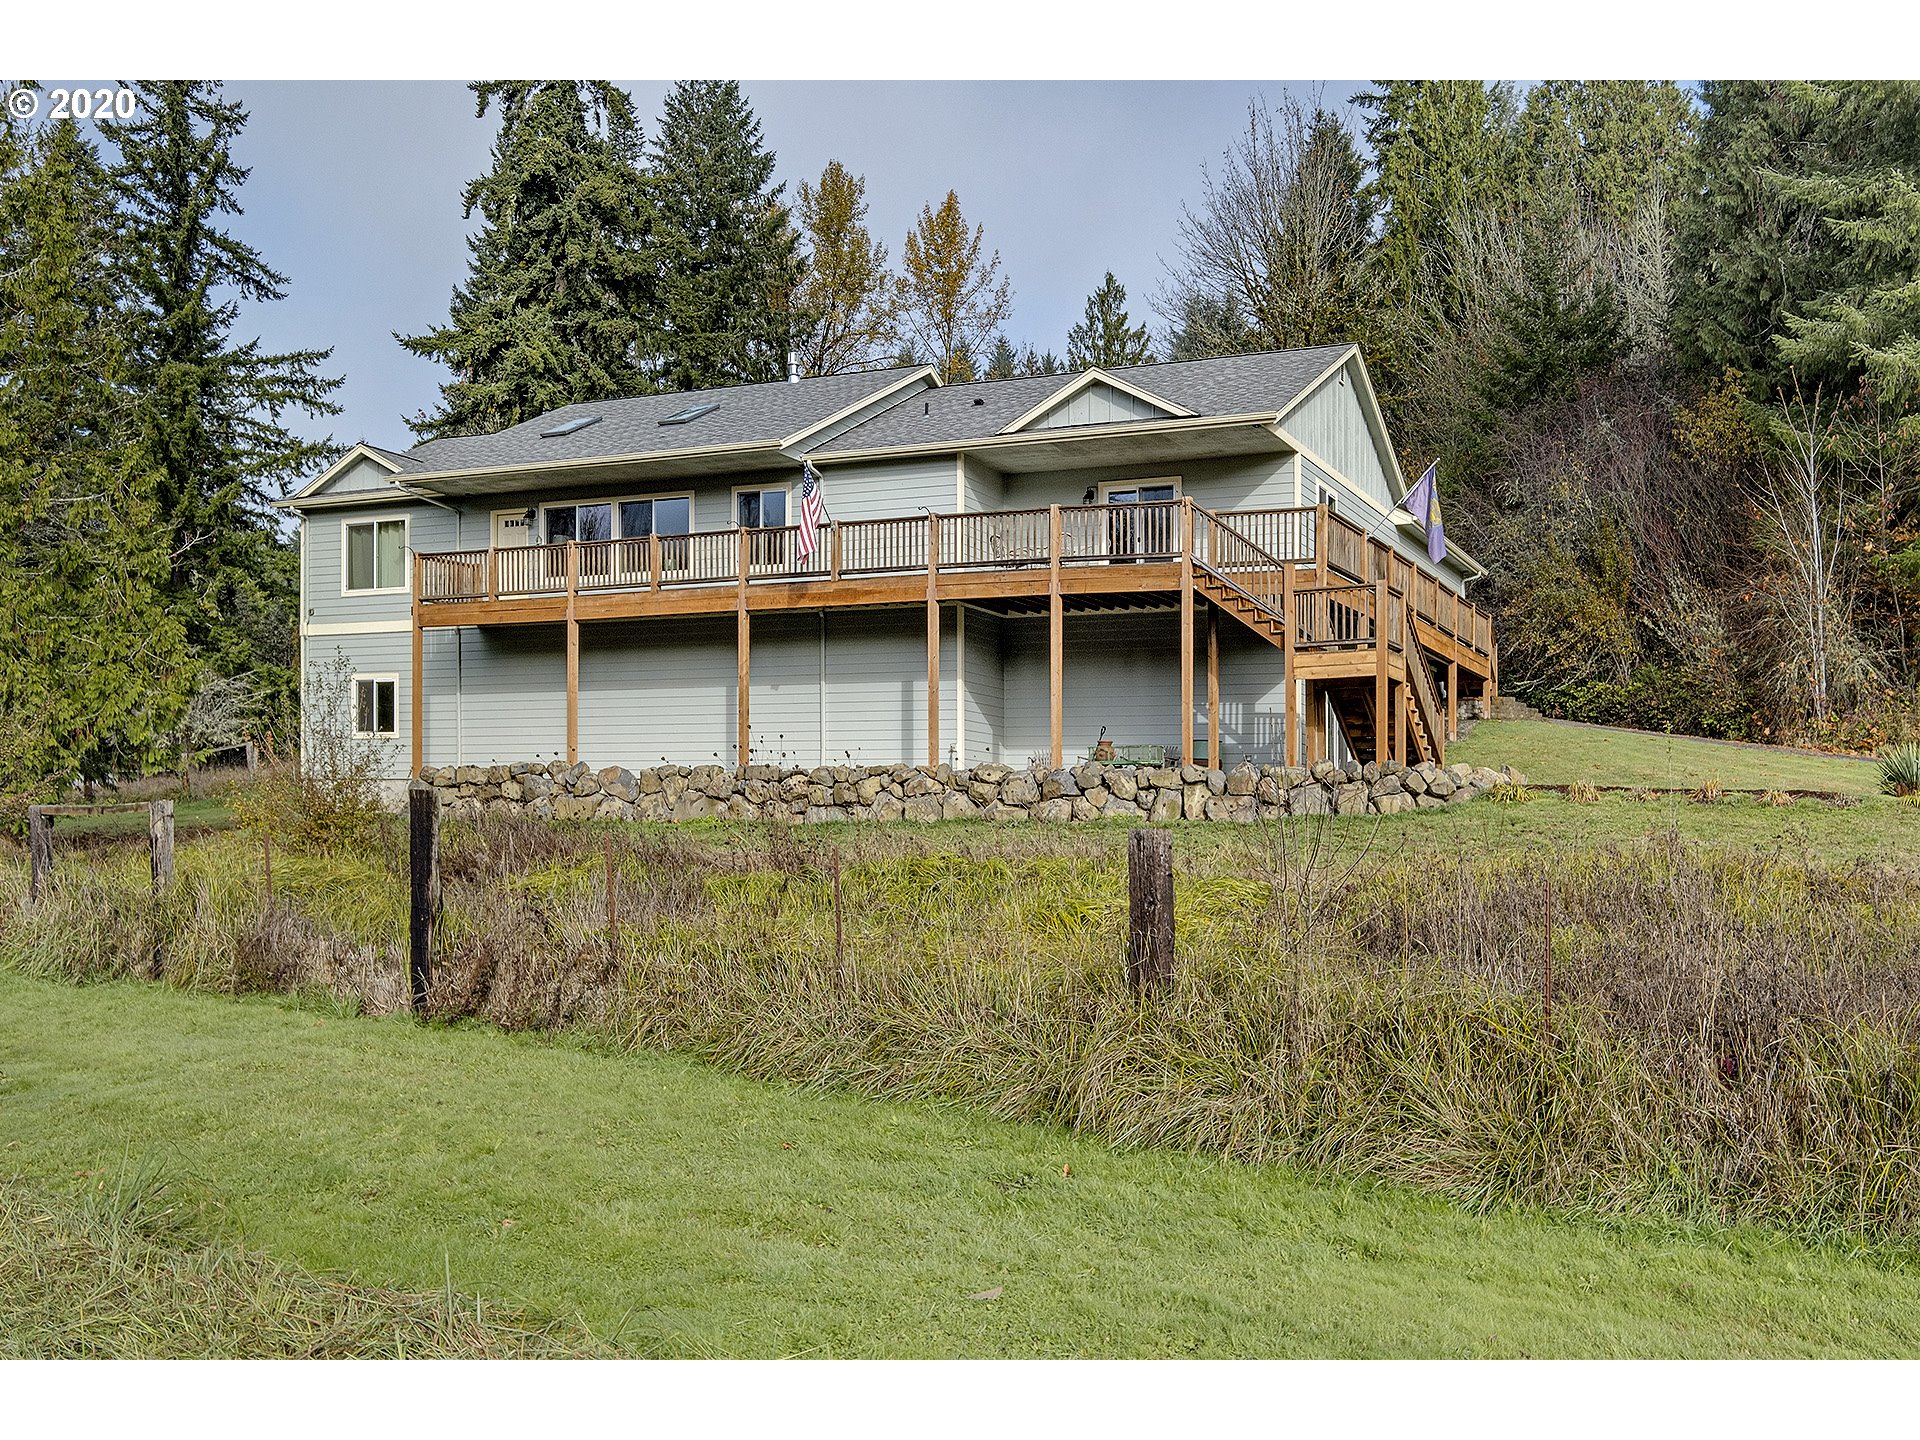 20953 SCAPPOOSE VERNONIA HWY (1 of 29)